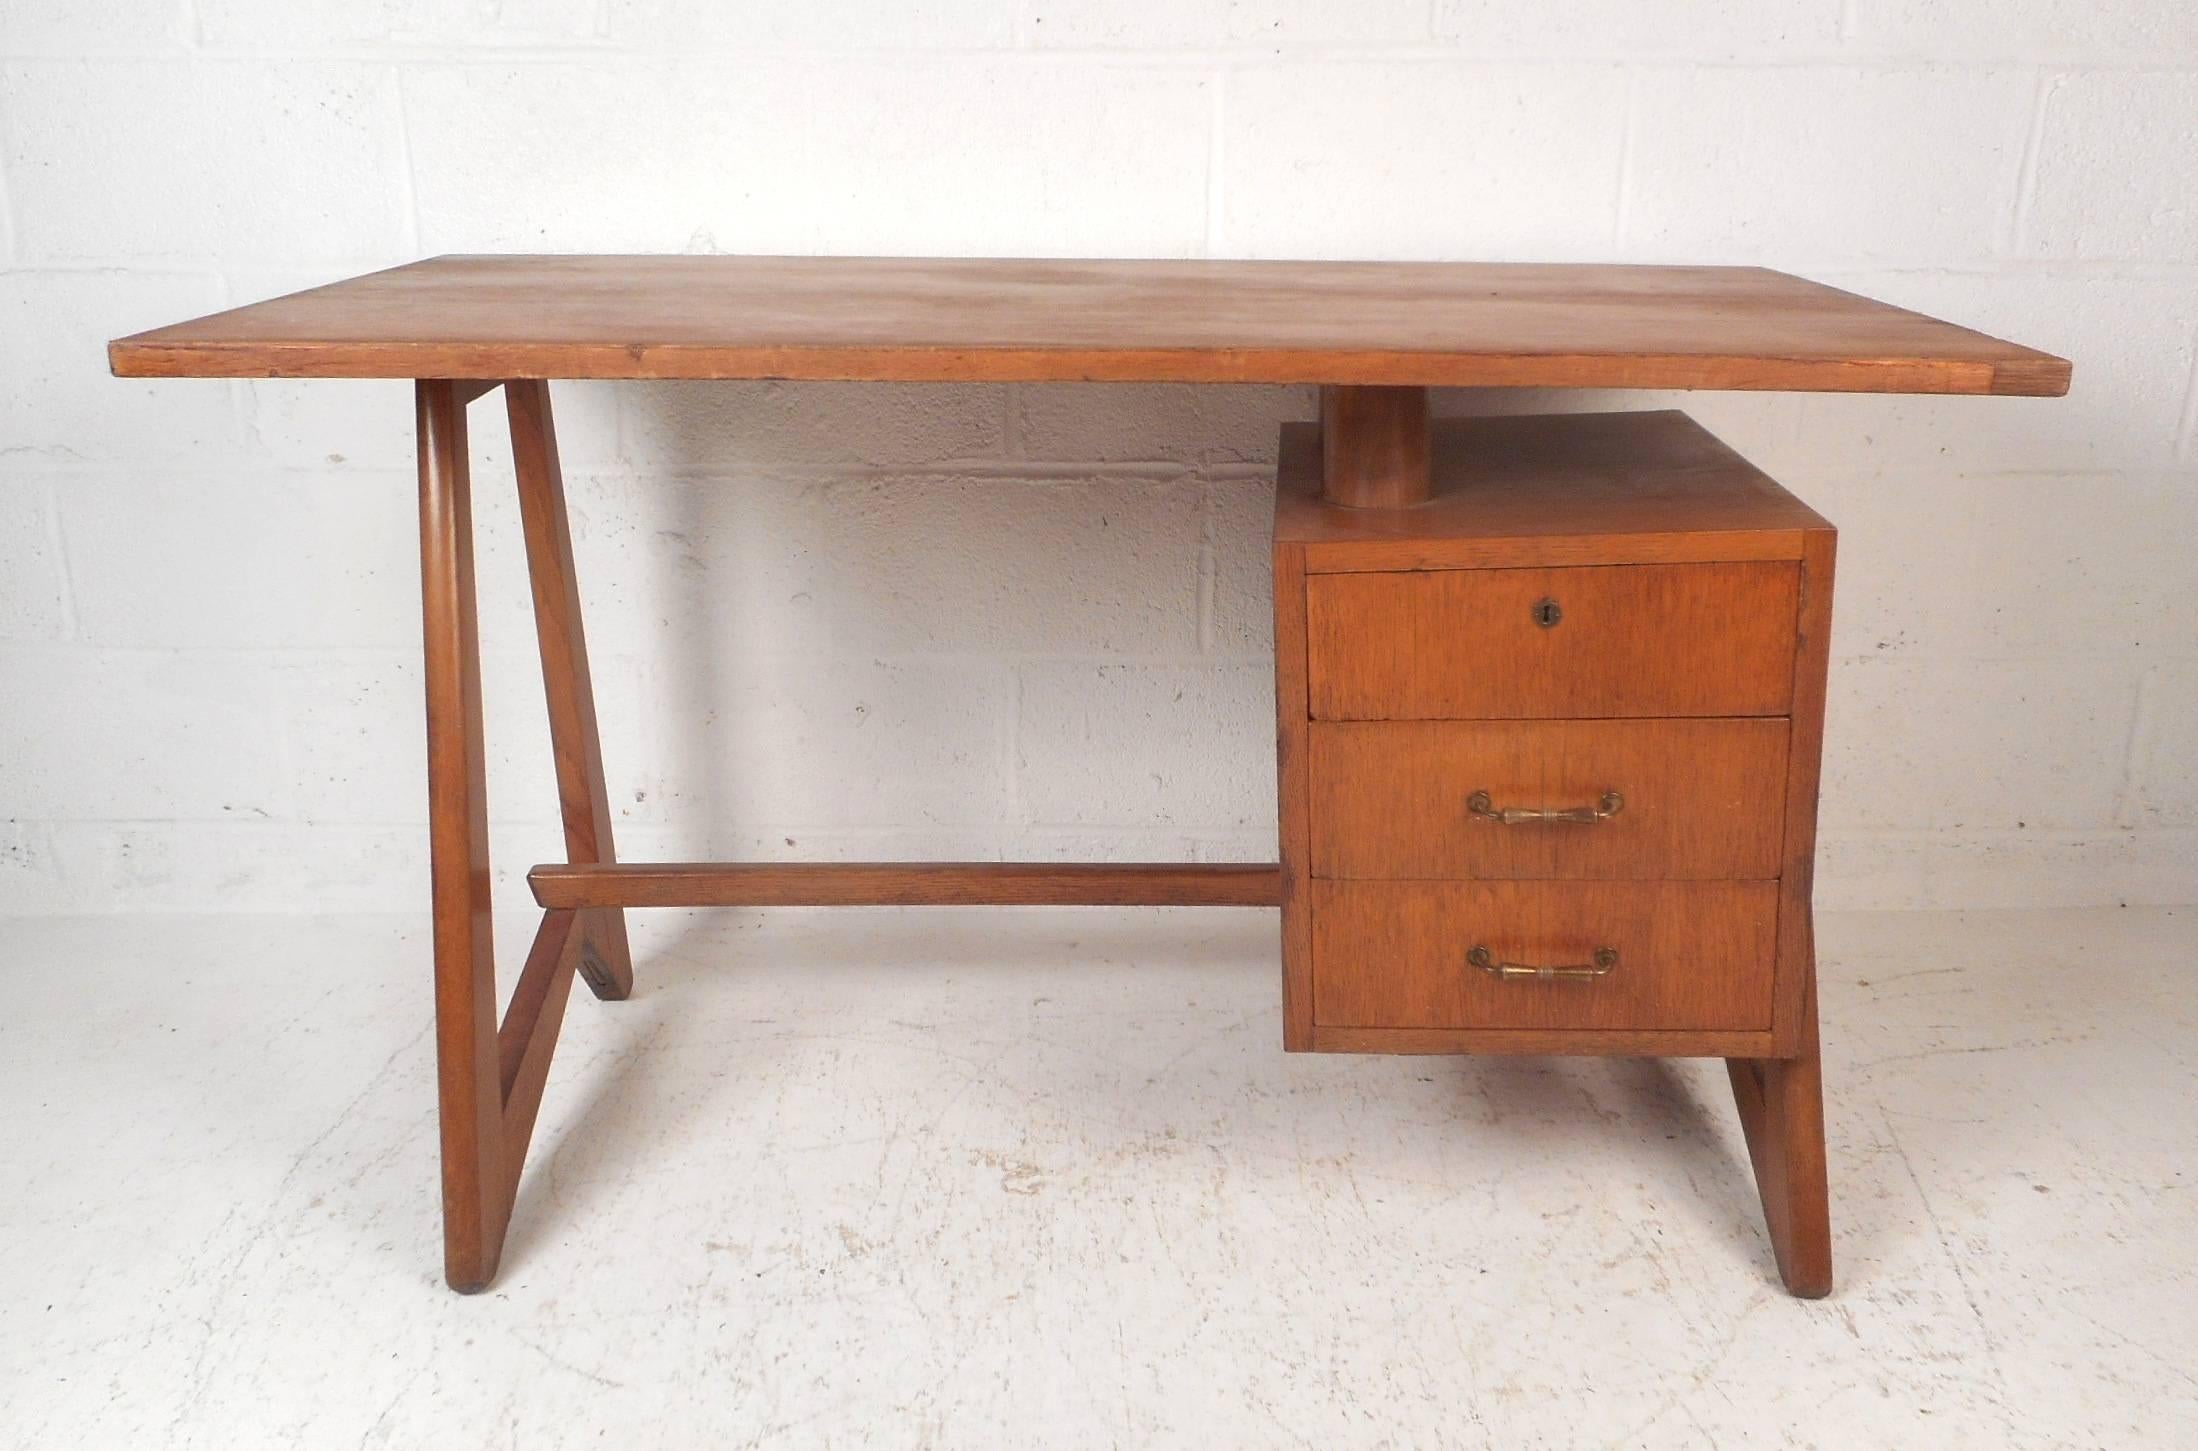 This amazing vintage modern desk features unique angled legs and a floating style table top. A beautiful case piece with a curved top, a finished back, and sculpted brass drawer pulls. This one of a kind mid-century desk offers plenty of work space